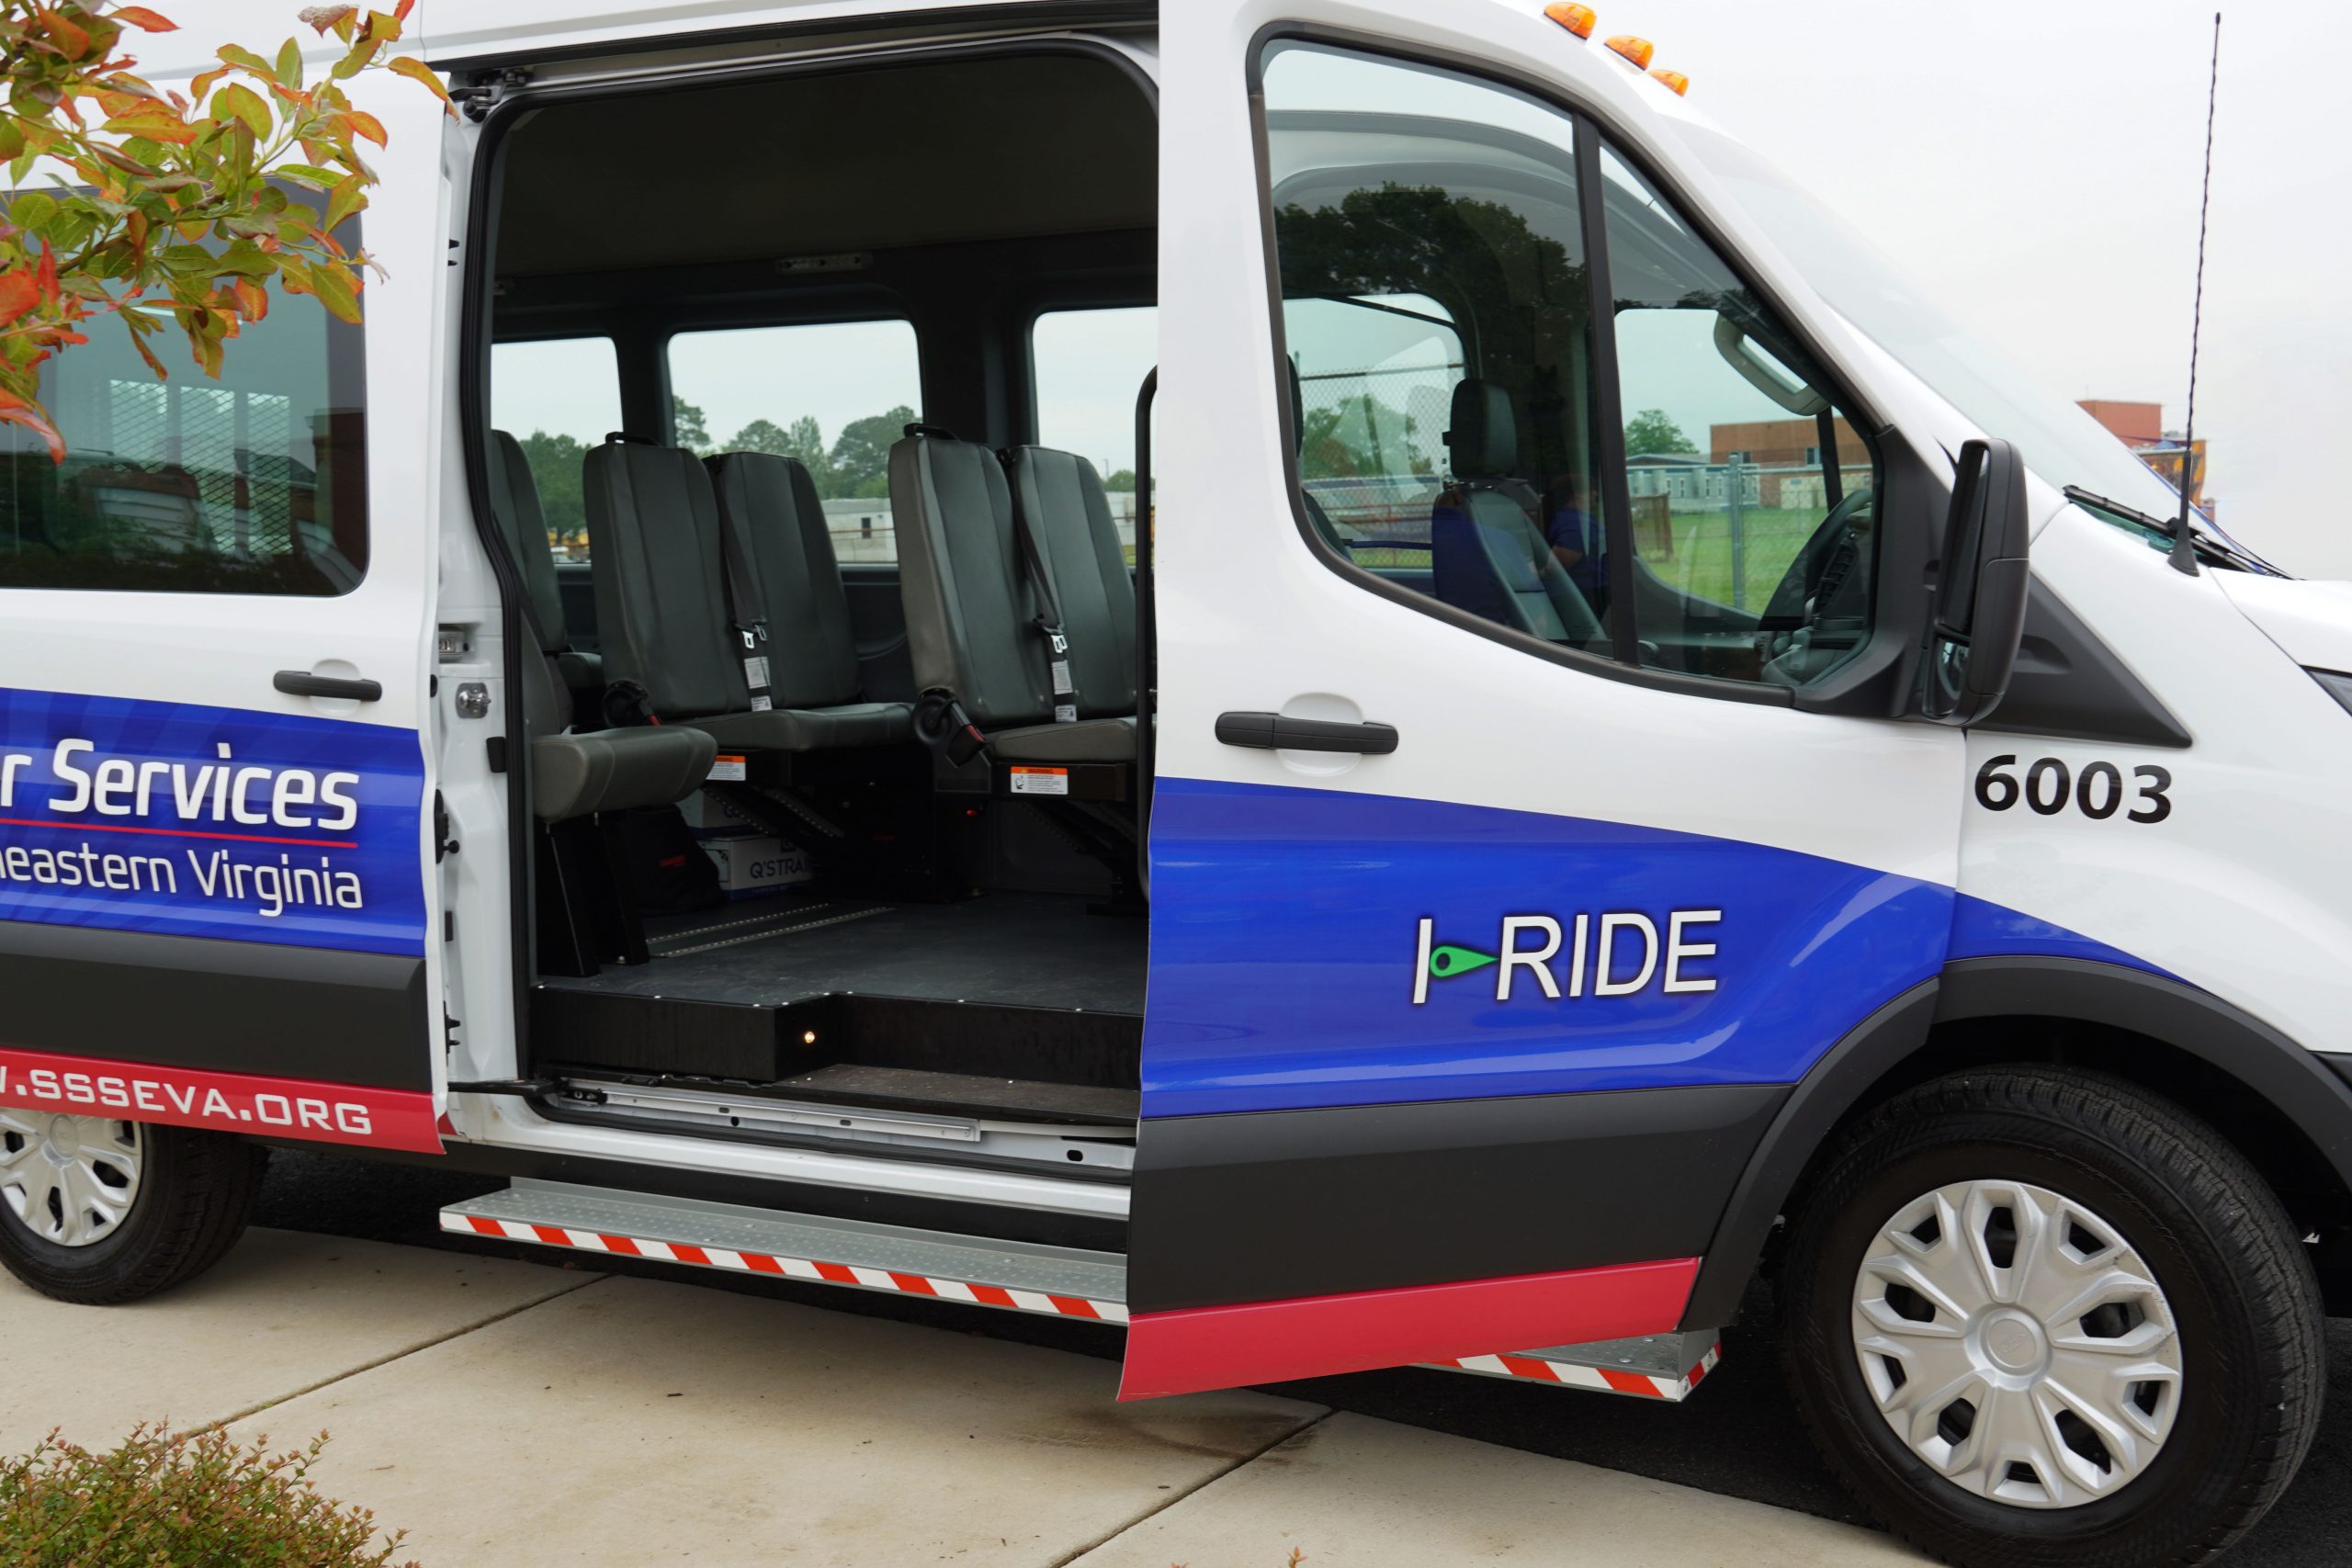 In the News: I-Ride NOW